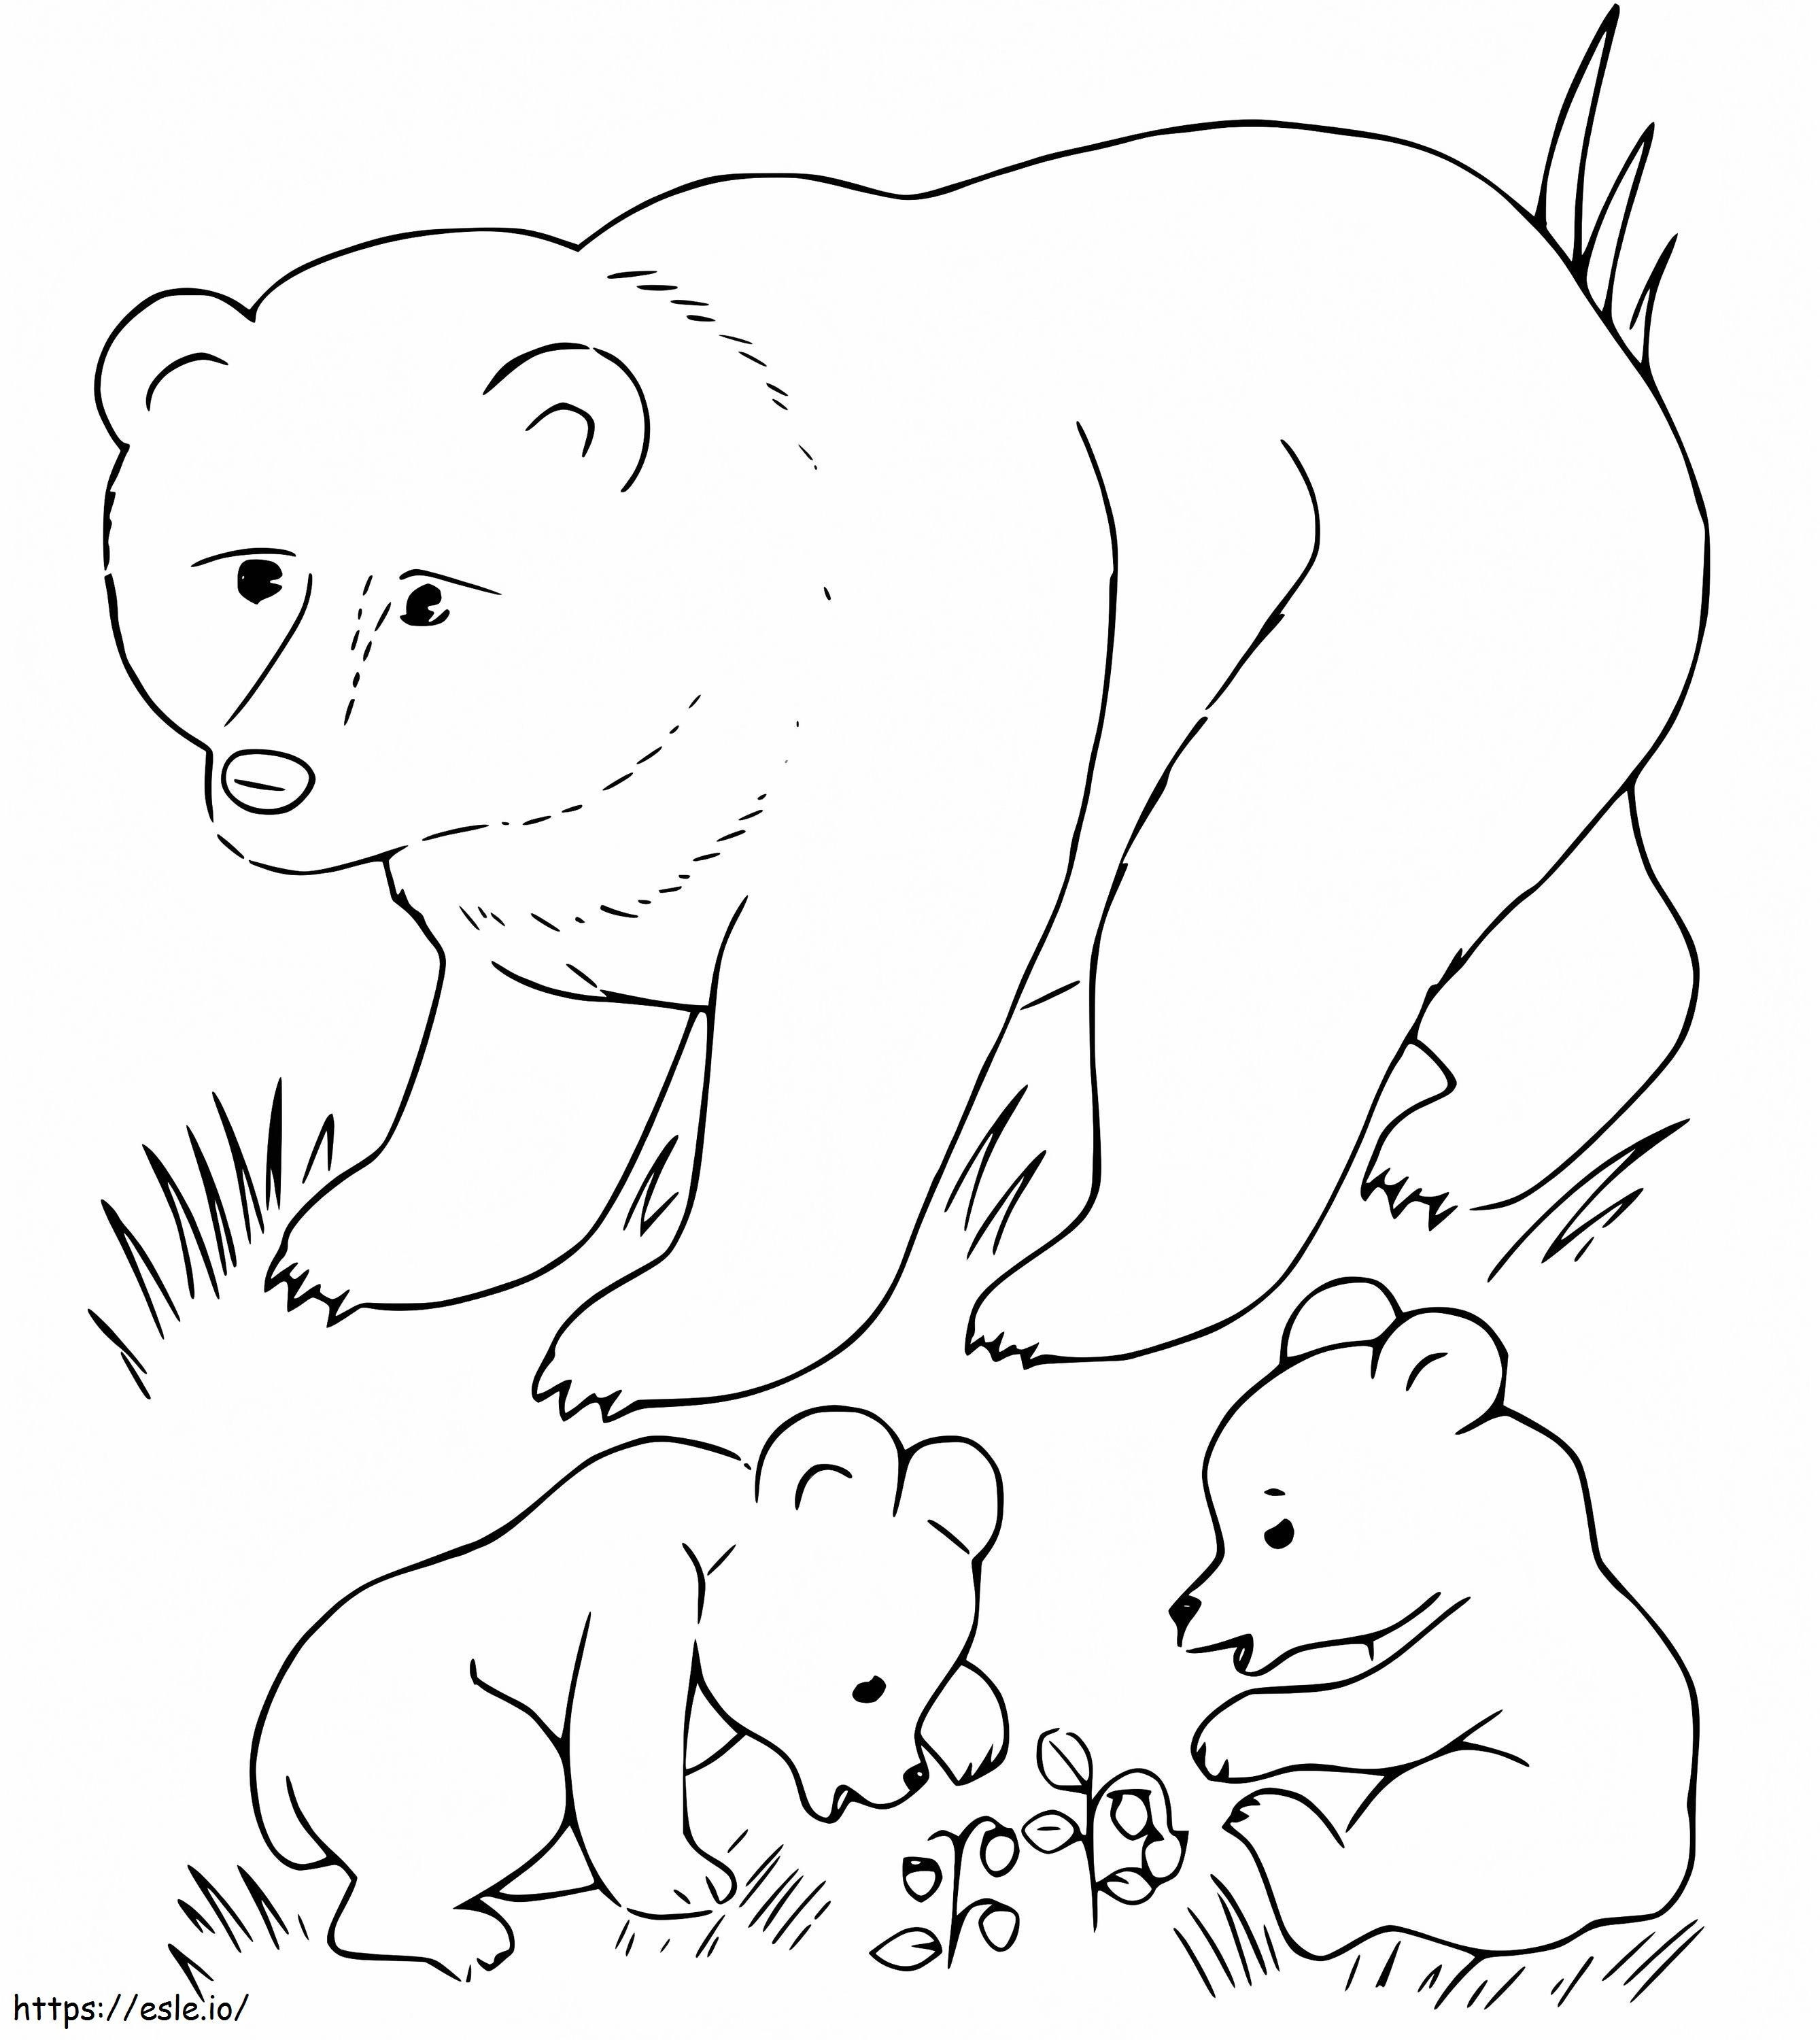 Black Bear Cubs coloring page